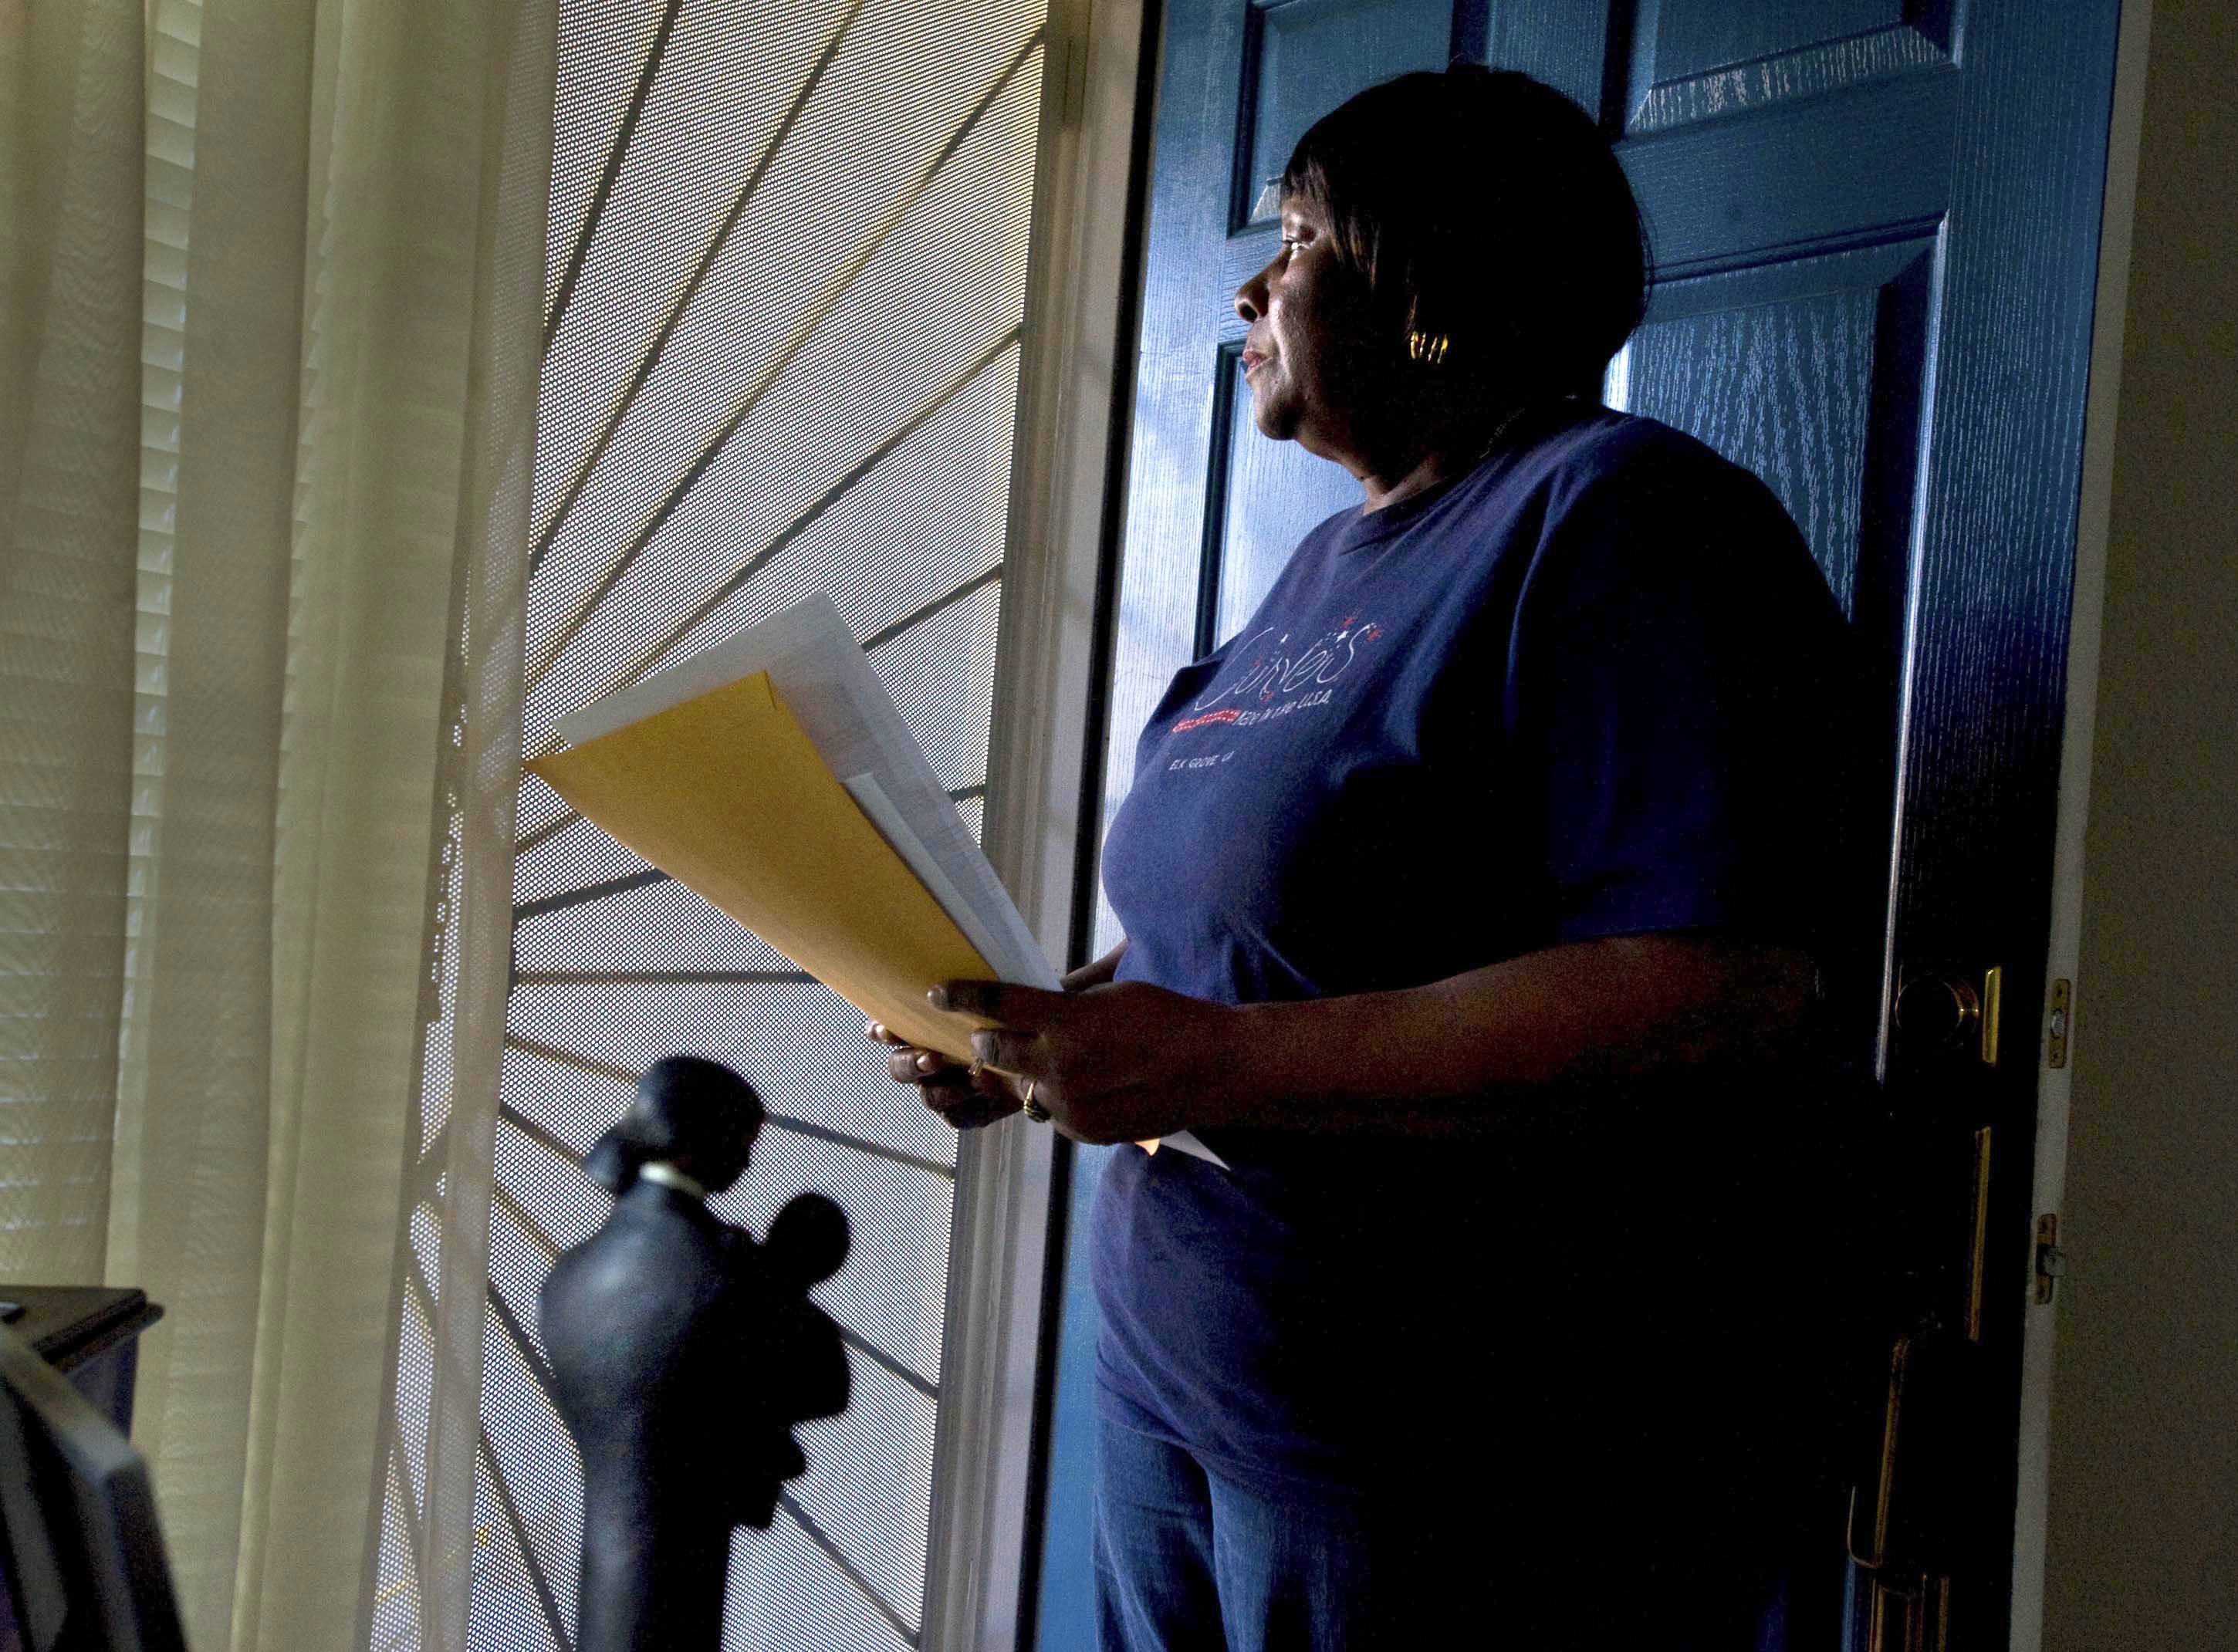 Black Homeownership - There has been a serious decline in Black homeownership in the past few years in part due to the ongoing recession but also because of a disproportionate number of foreclosures. A debt limit default could lead to even more foreclosures as African-Americans struggle to hold on to their homes. (Photo: Sacramento Bee/MCT/Landov)